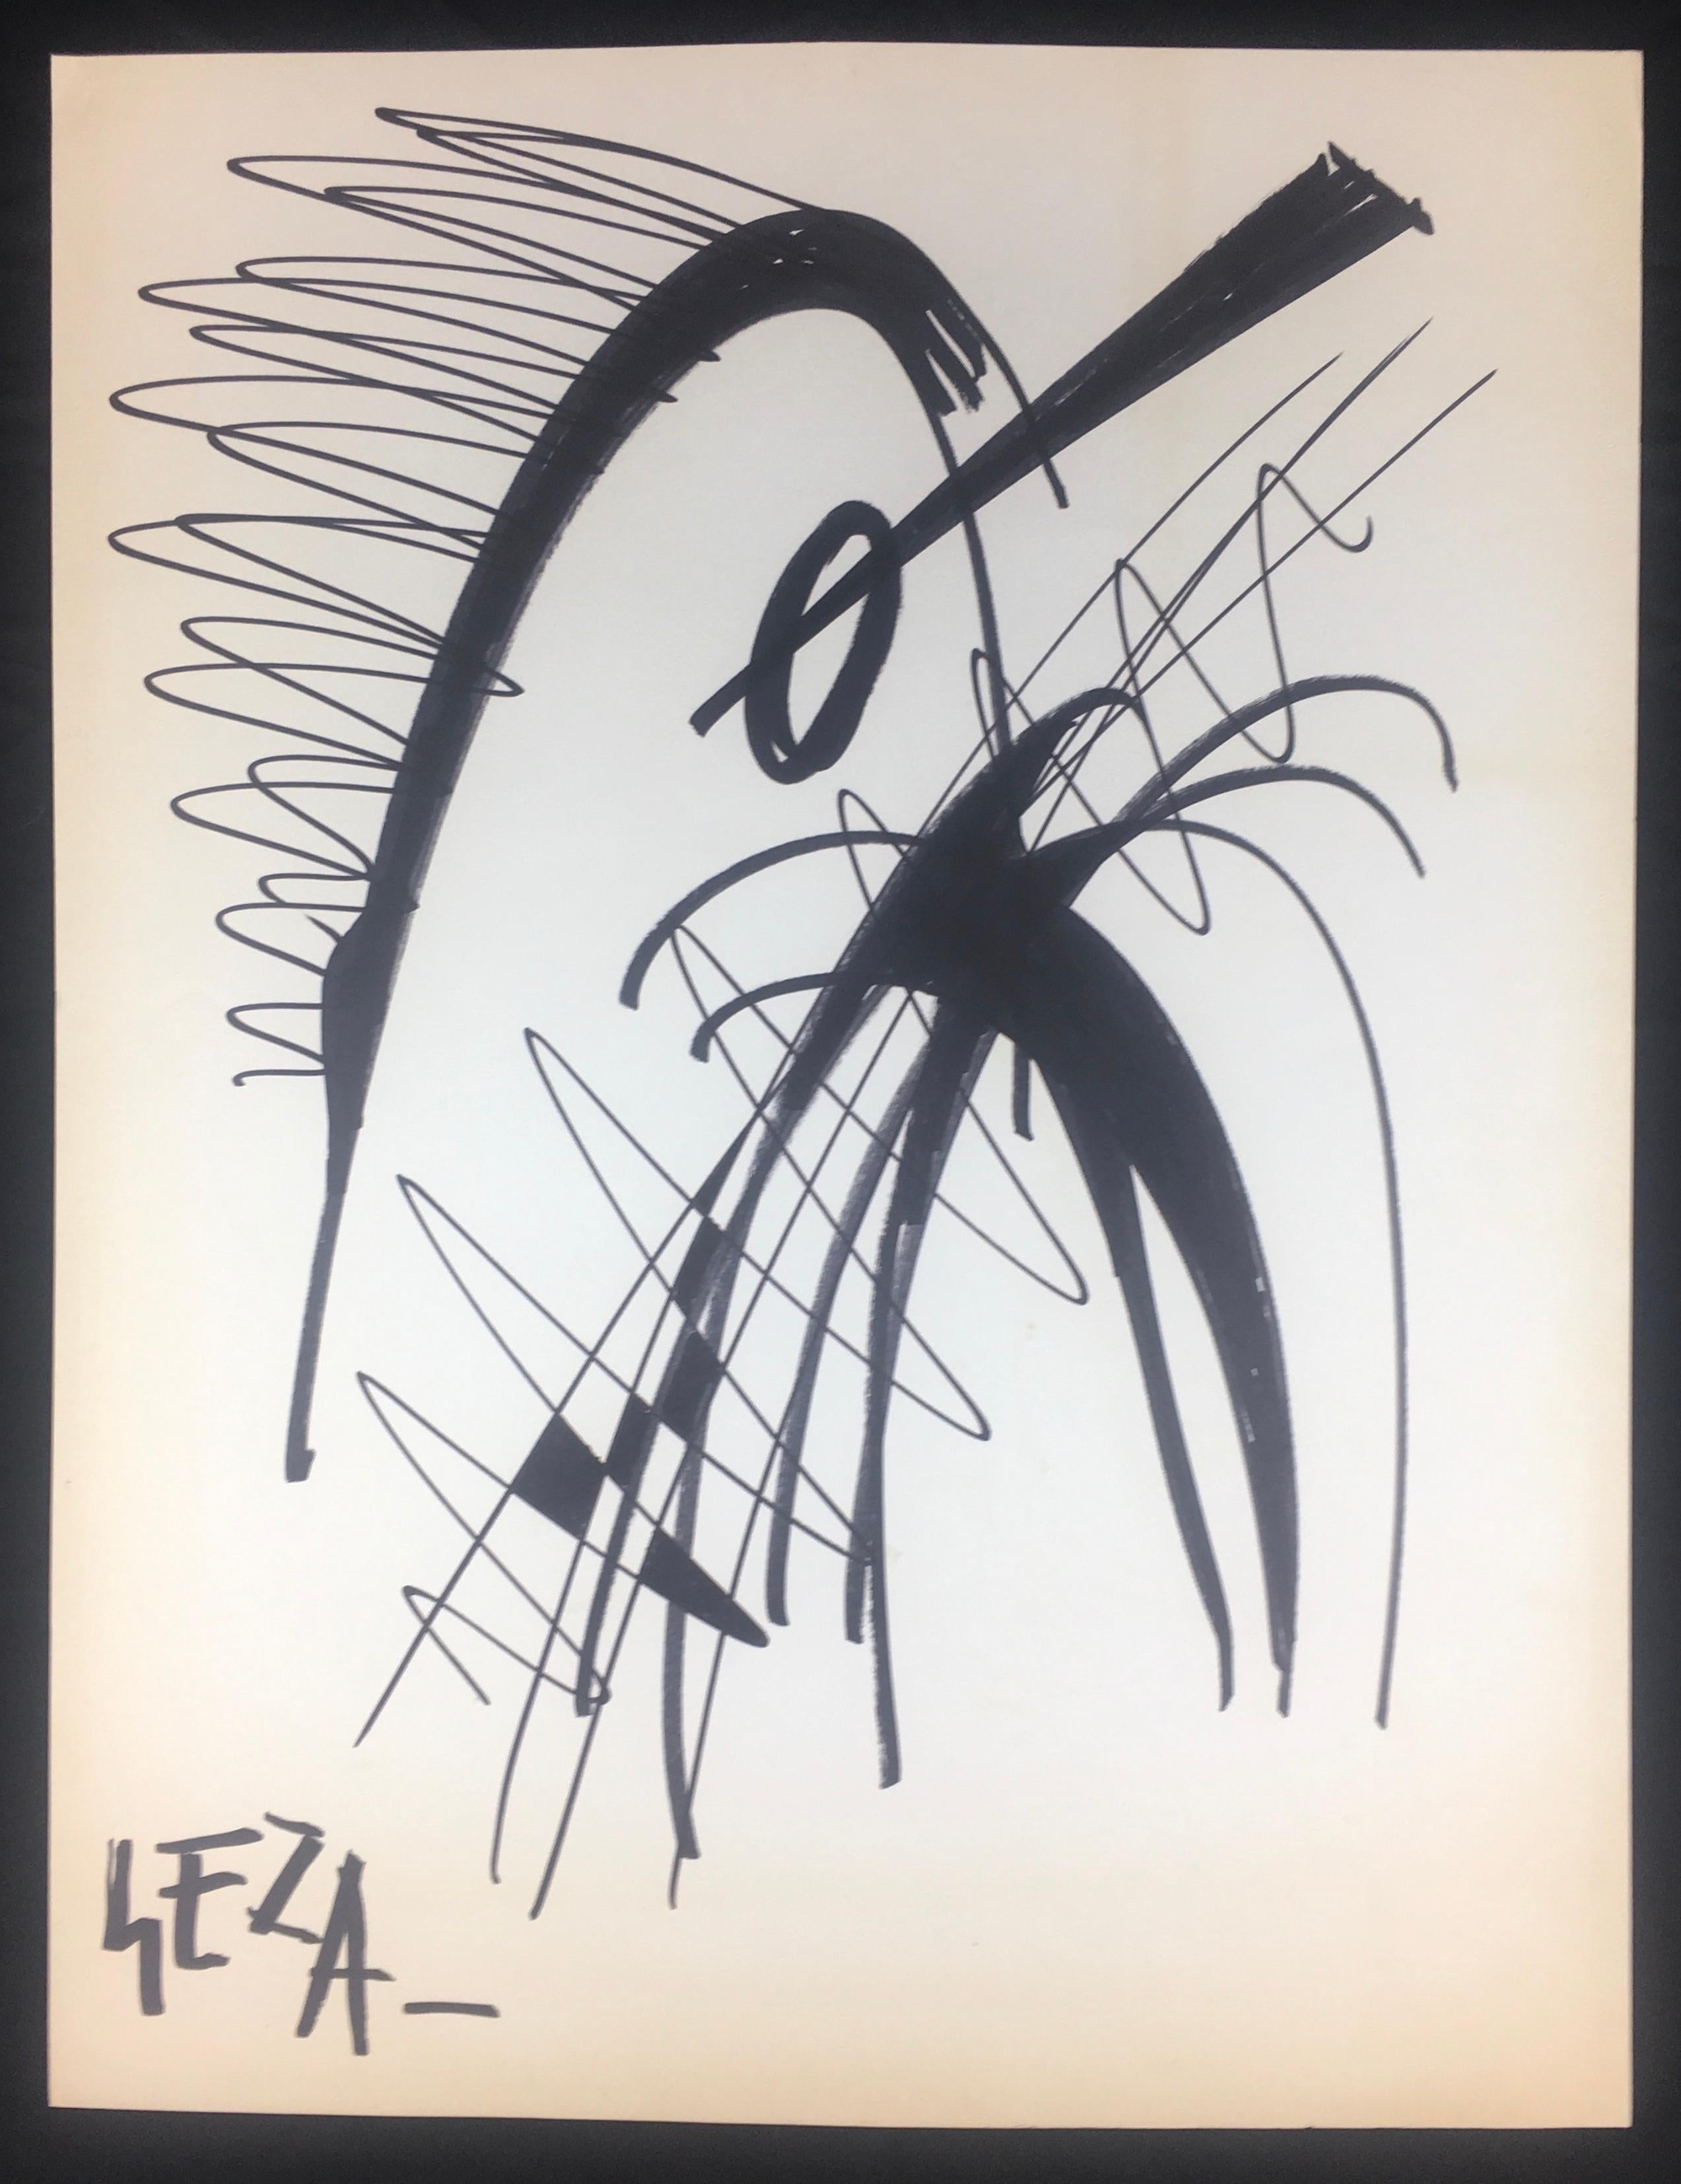 Very decorative collection of modern abstract drawings signed Geza and dated 1988. Attributed to Geza Skobel. 

Geza Szobel (1905-1963) is a Hungarian painter naturalized French. He spent his entire career in Paris between 1935 and 1963. In Paris,